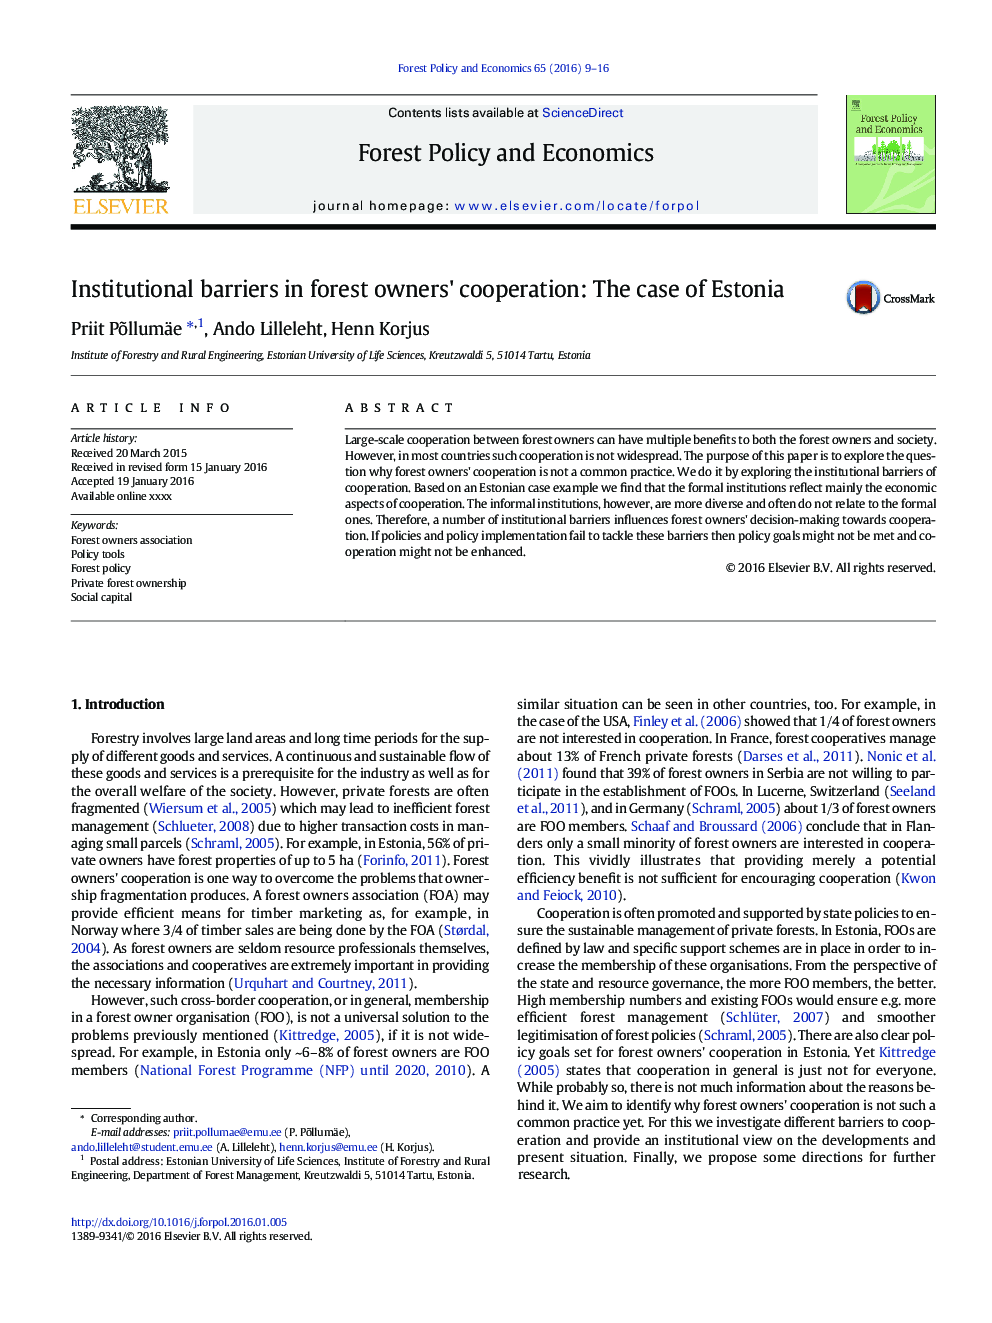 Institutional barriers in forest owners' cooperation: The case of Estonia